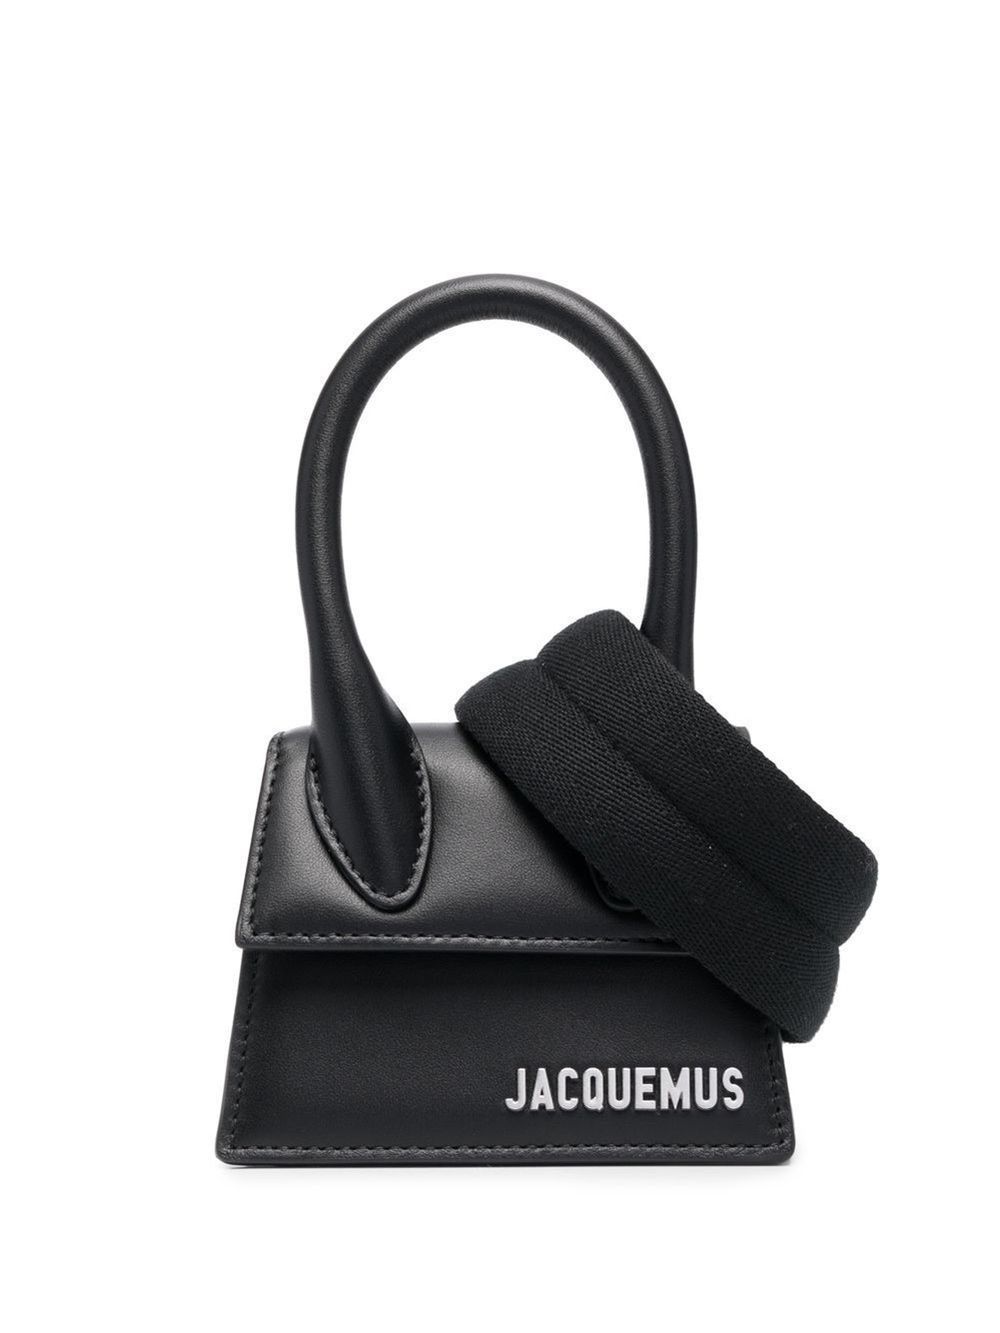 Jacquemus Le Chiquito Homme Crossbody Bag In Black